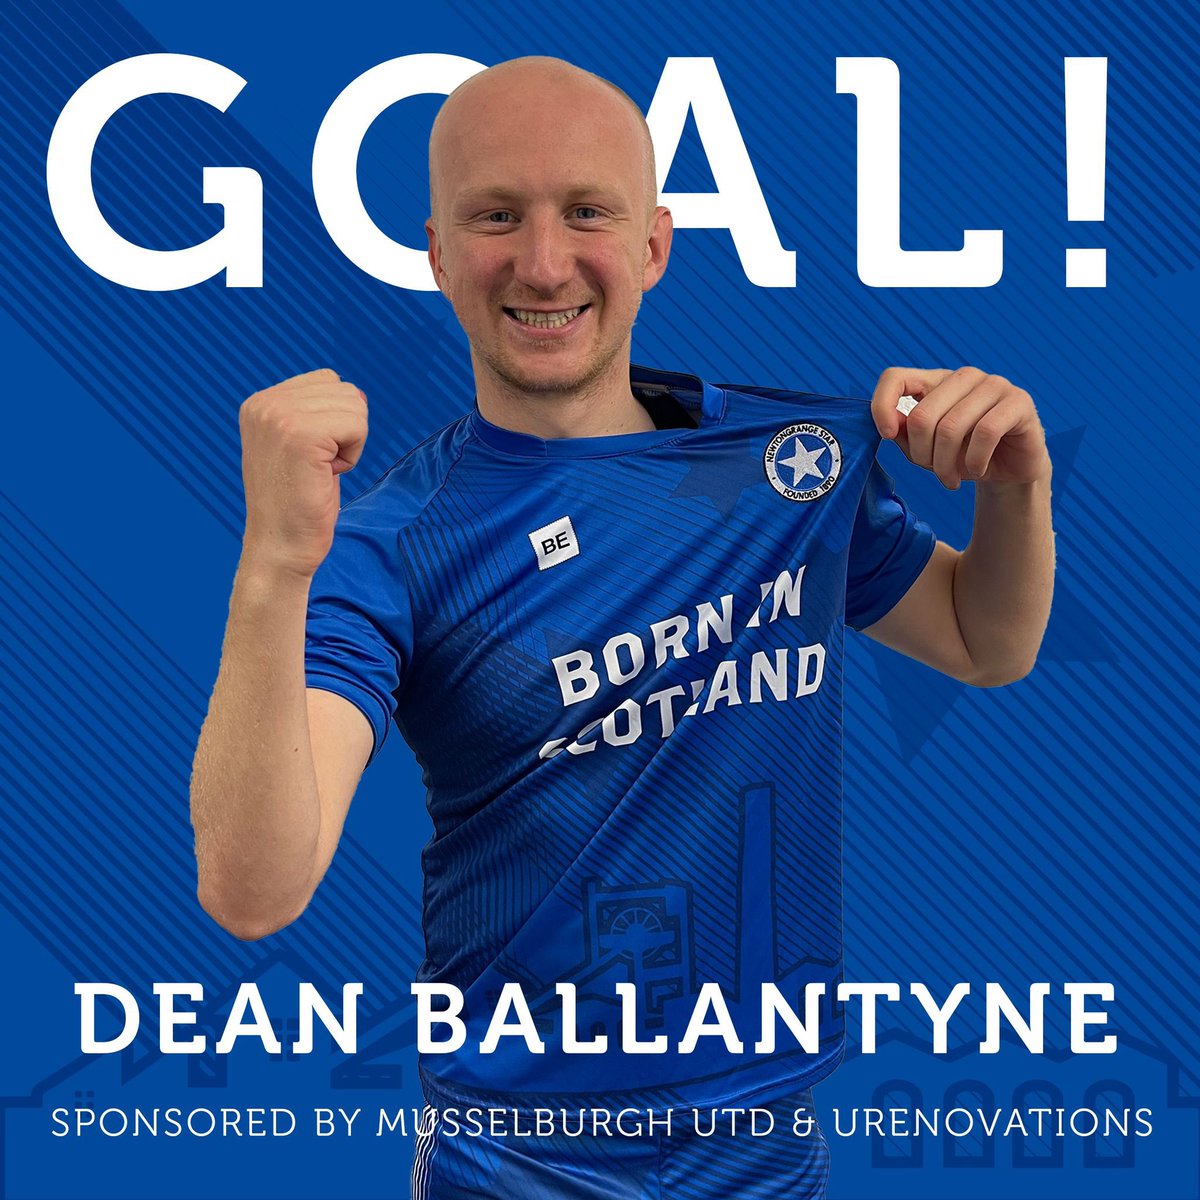 It’s a double for @DeanBallantyne as he fires home from the spot @BlackburnUnited 0 Star 2